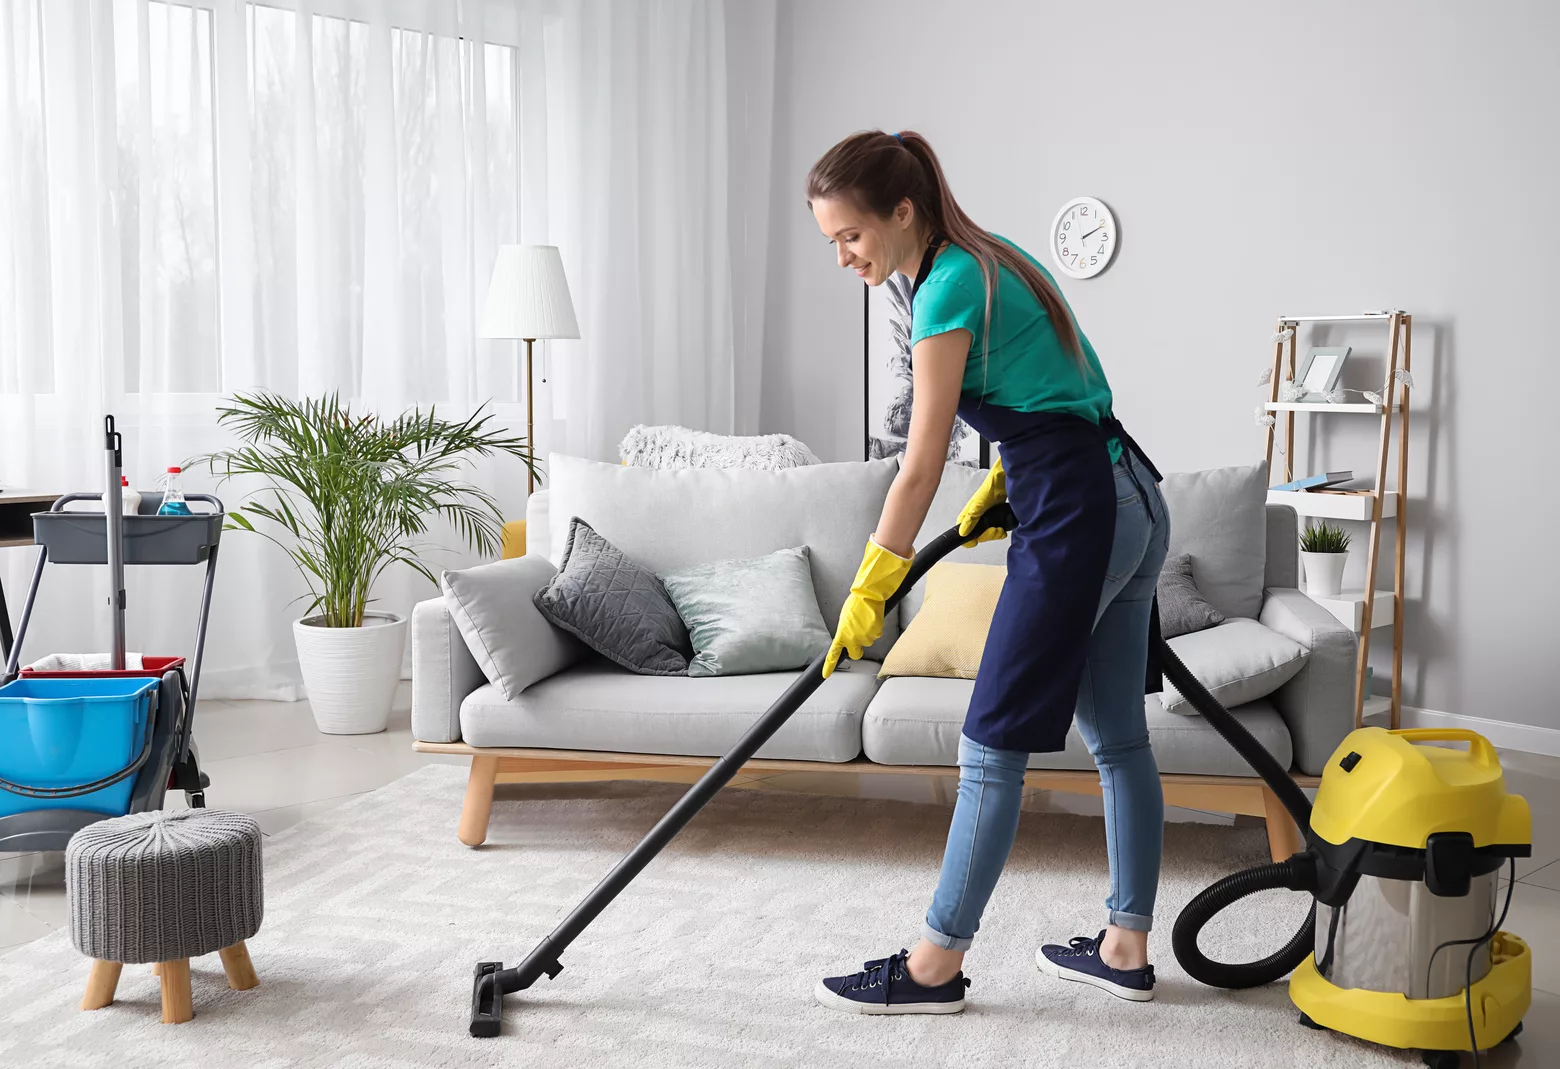 Female cleaning expert with vacuum cleaner in room